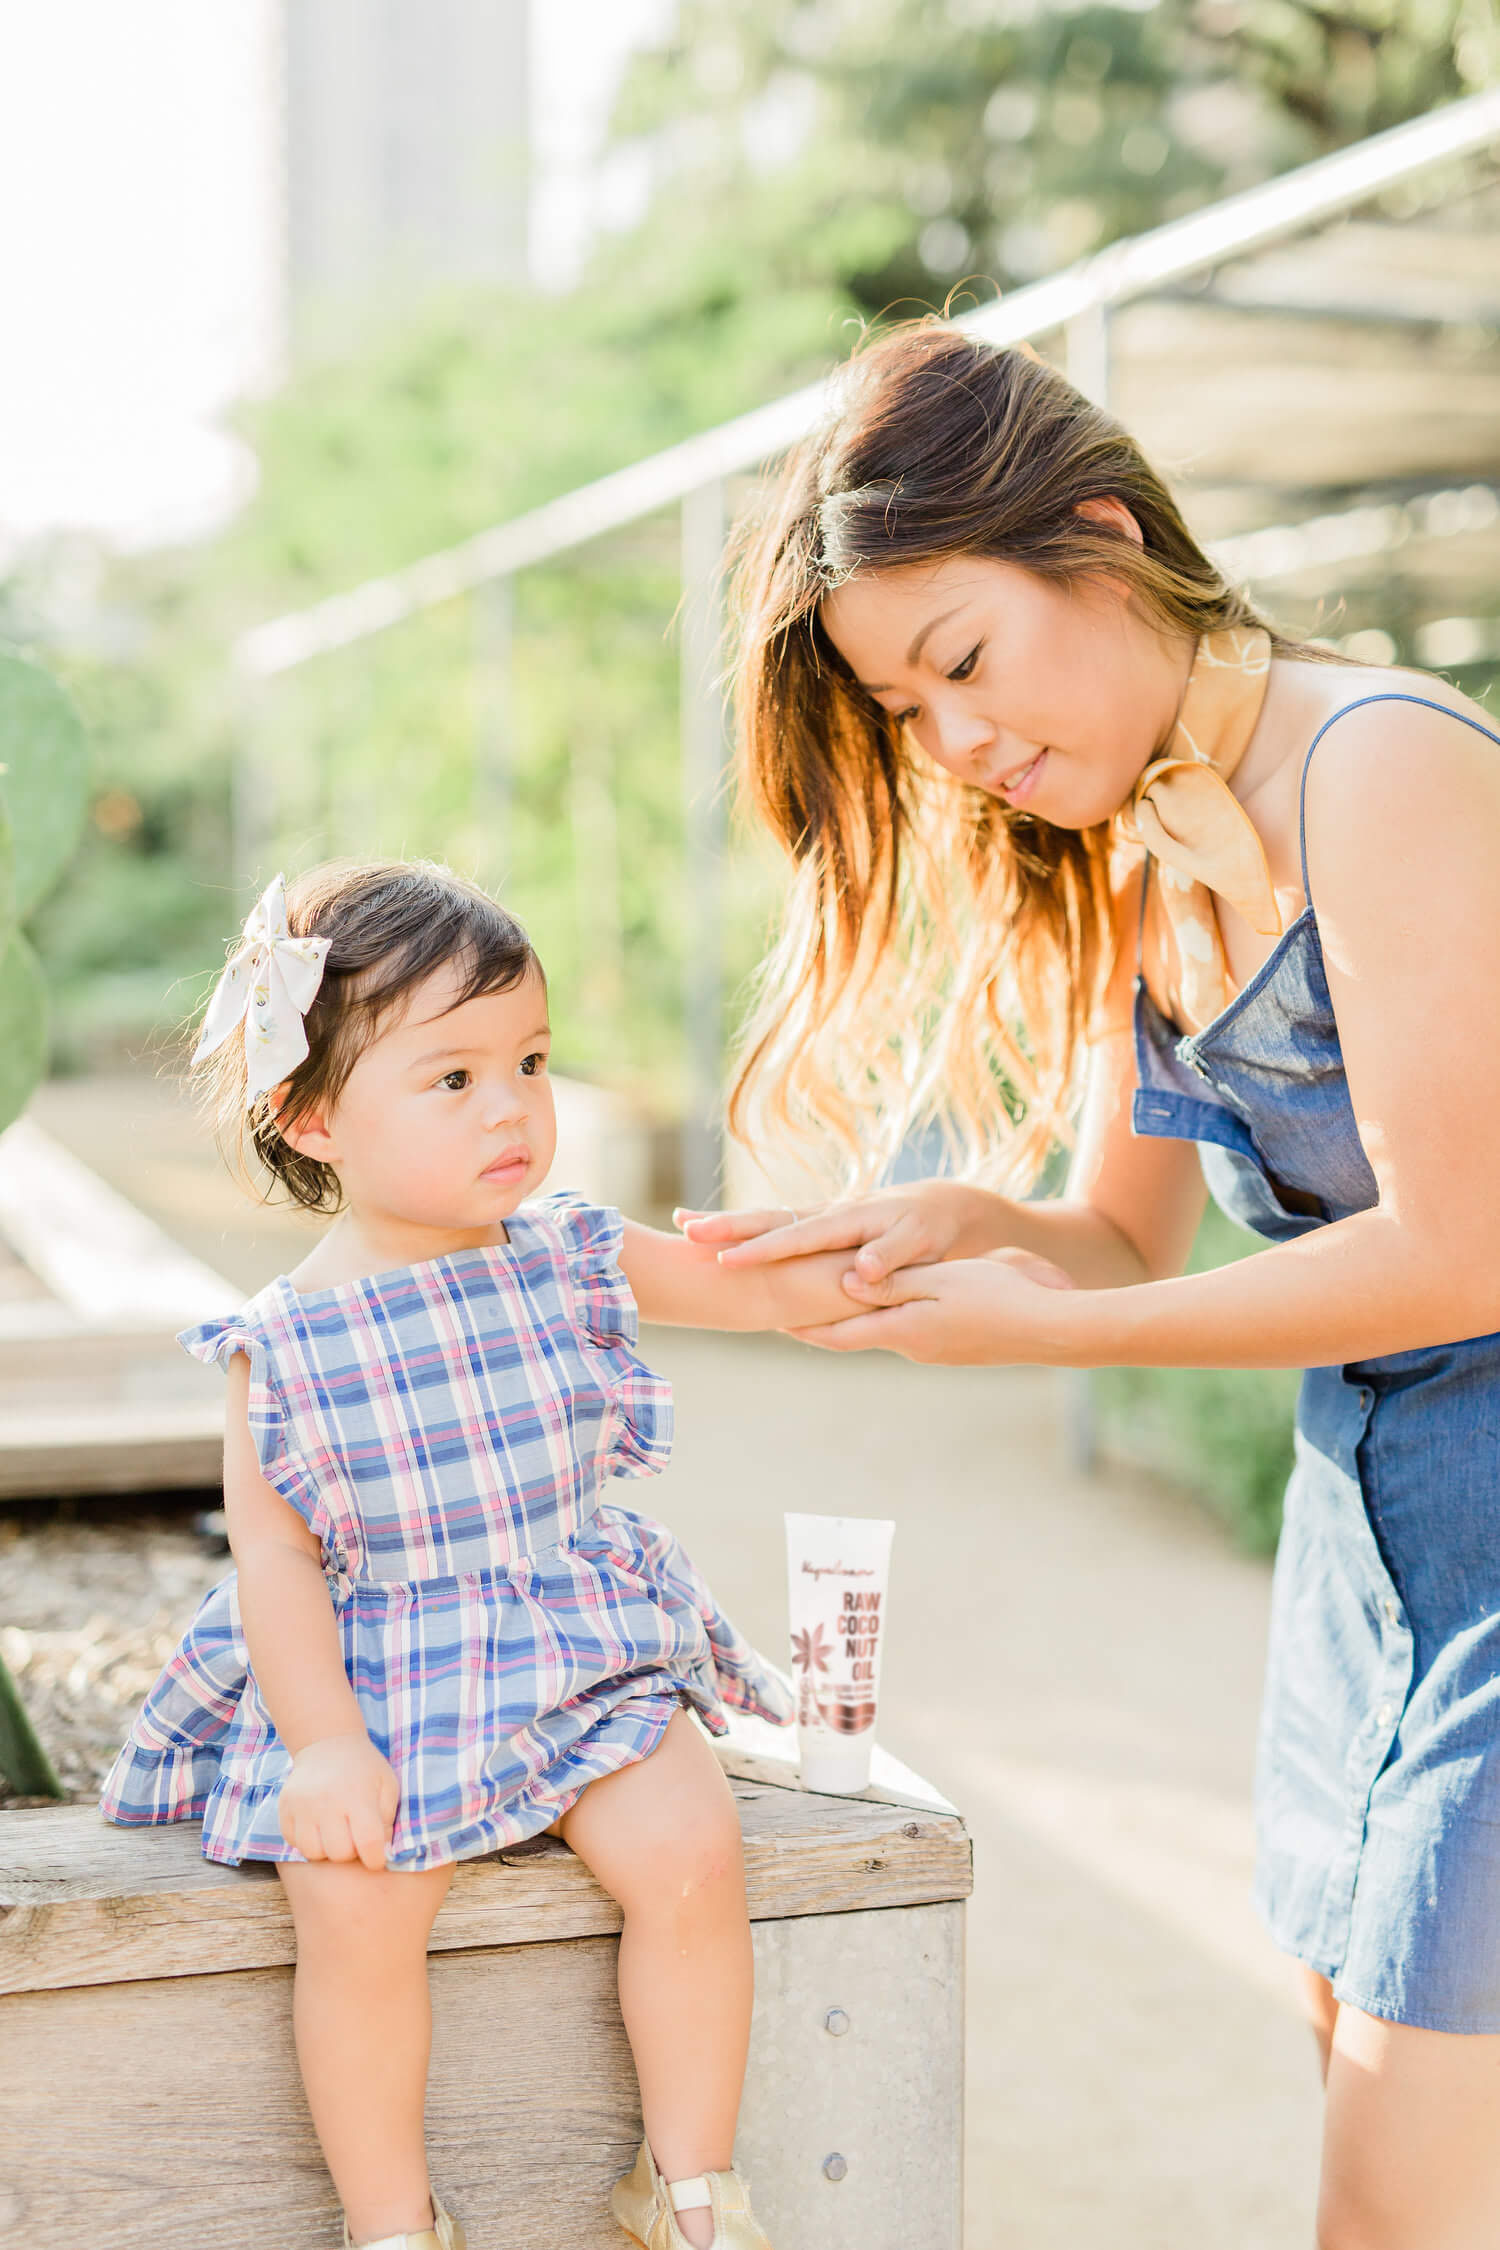 A woman in a denim dress applies sunscreen on the arm of a toddler wearing a plaid dress, sitting on a wooden ledge in a sunny outdoor setting.